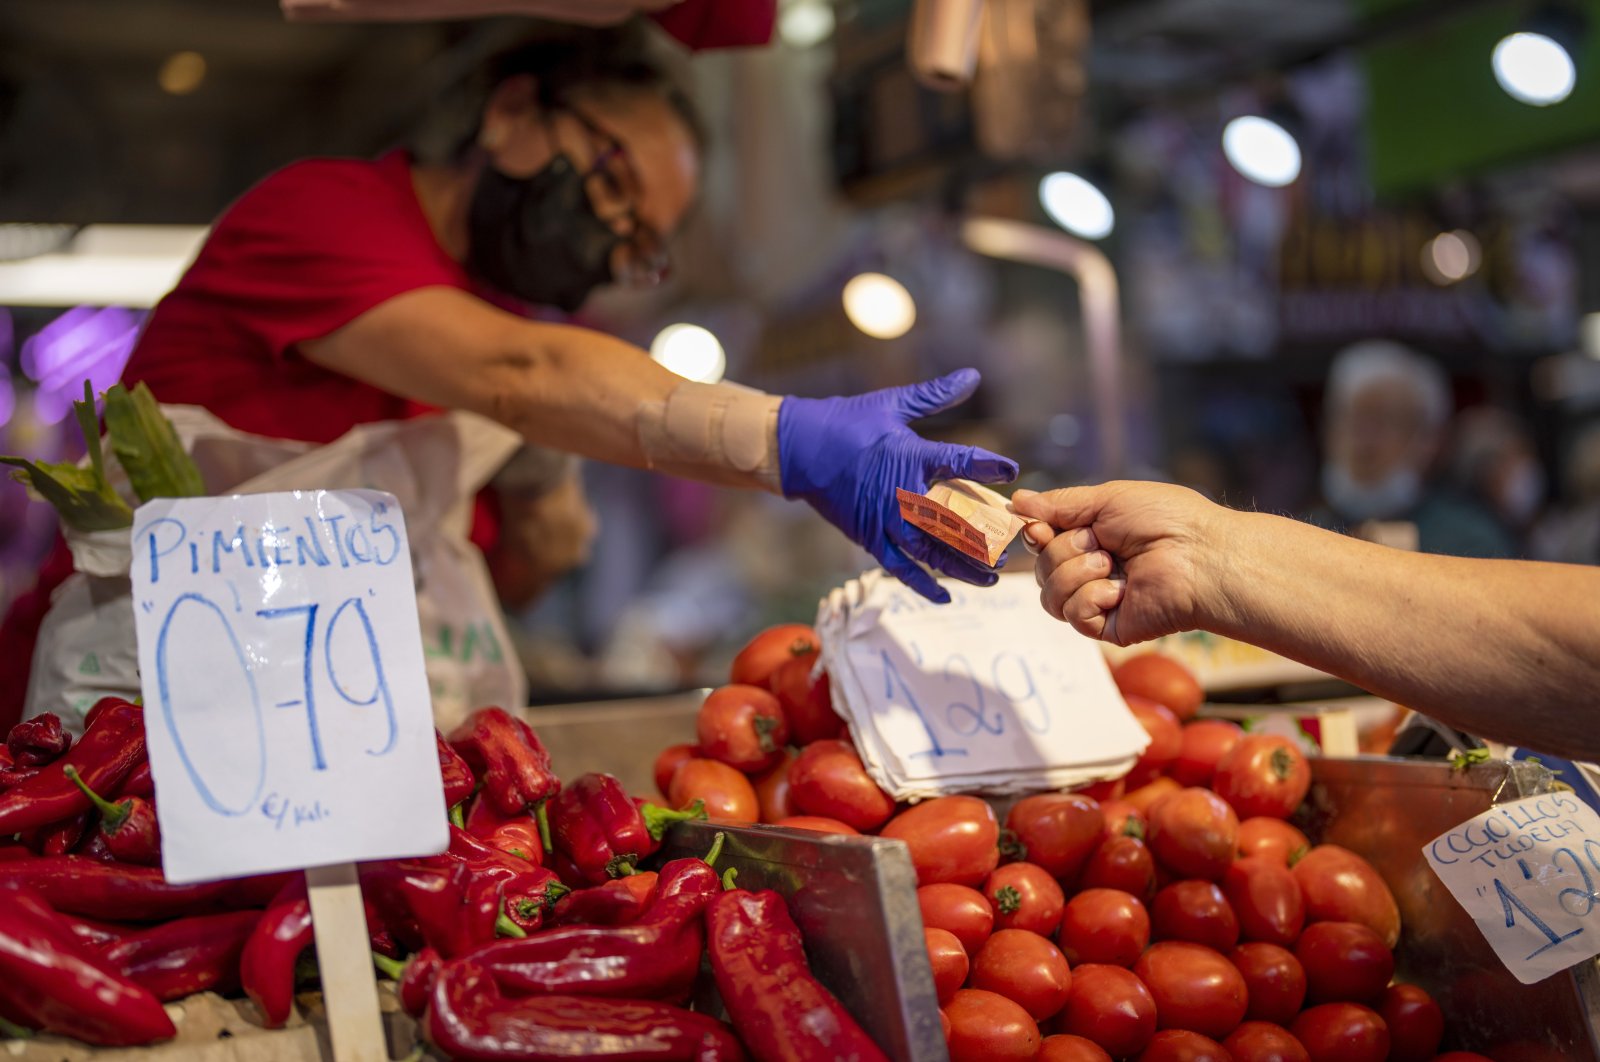 A customer pays for vegetables at the Maravillas market in Madrid, Spain, May 12, 2022. (AP Photo)